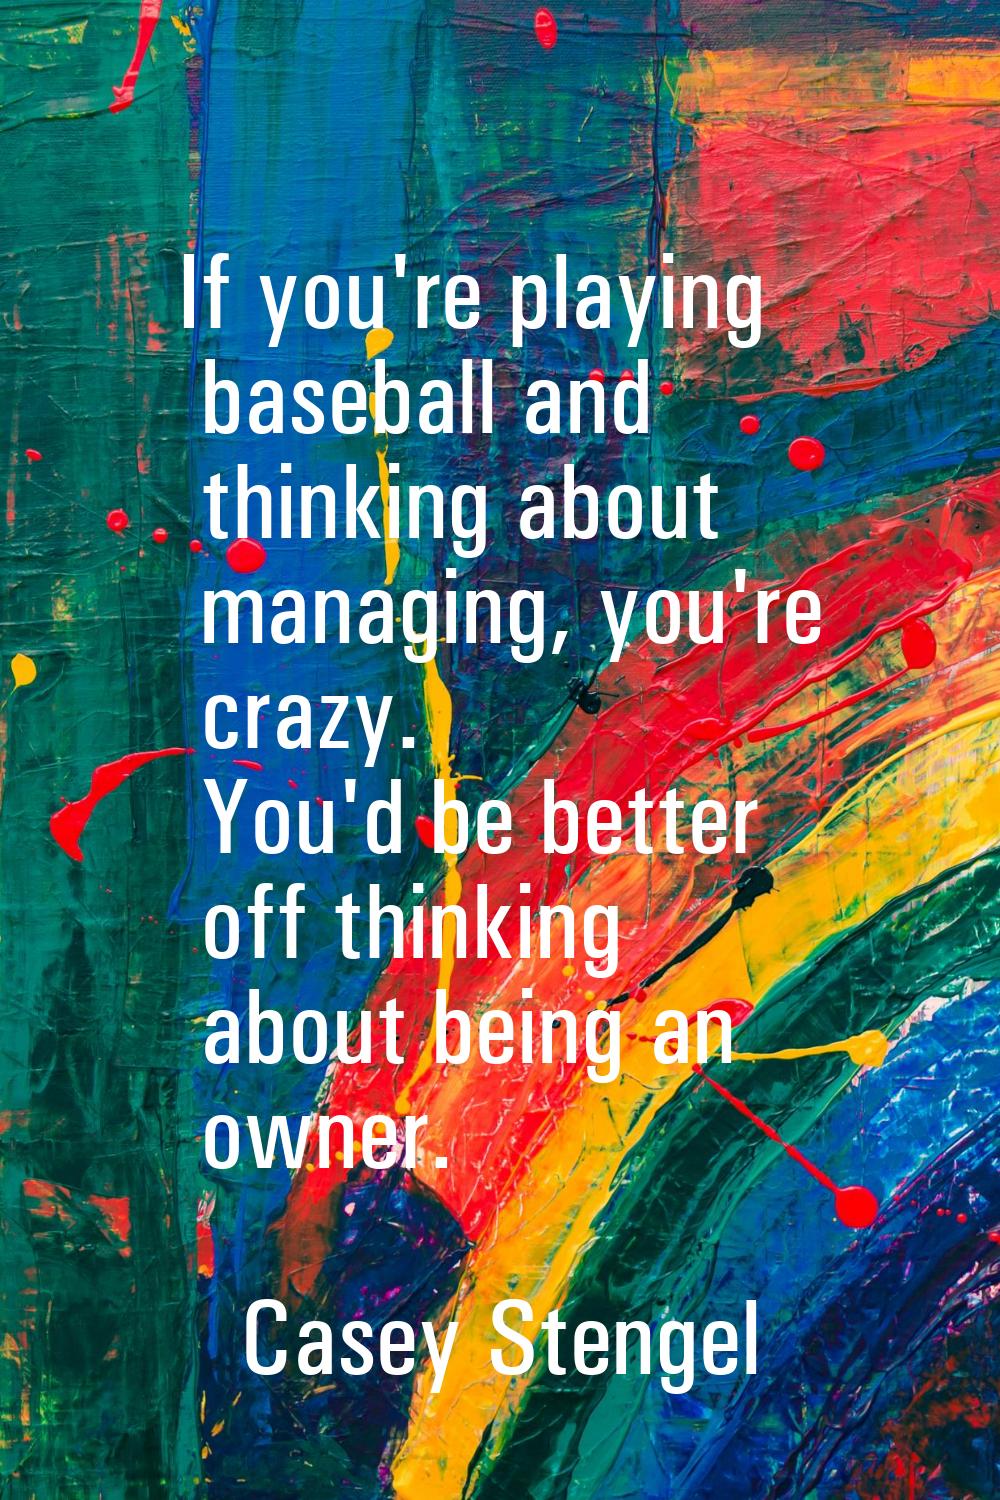 If you're playing baseball and thinking about managing, you're crazy. You'd be better off thinking 